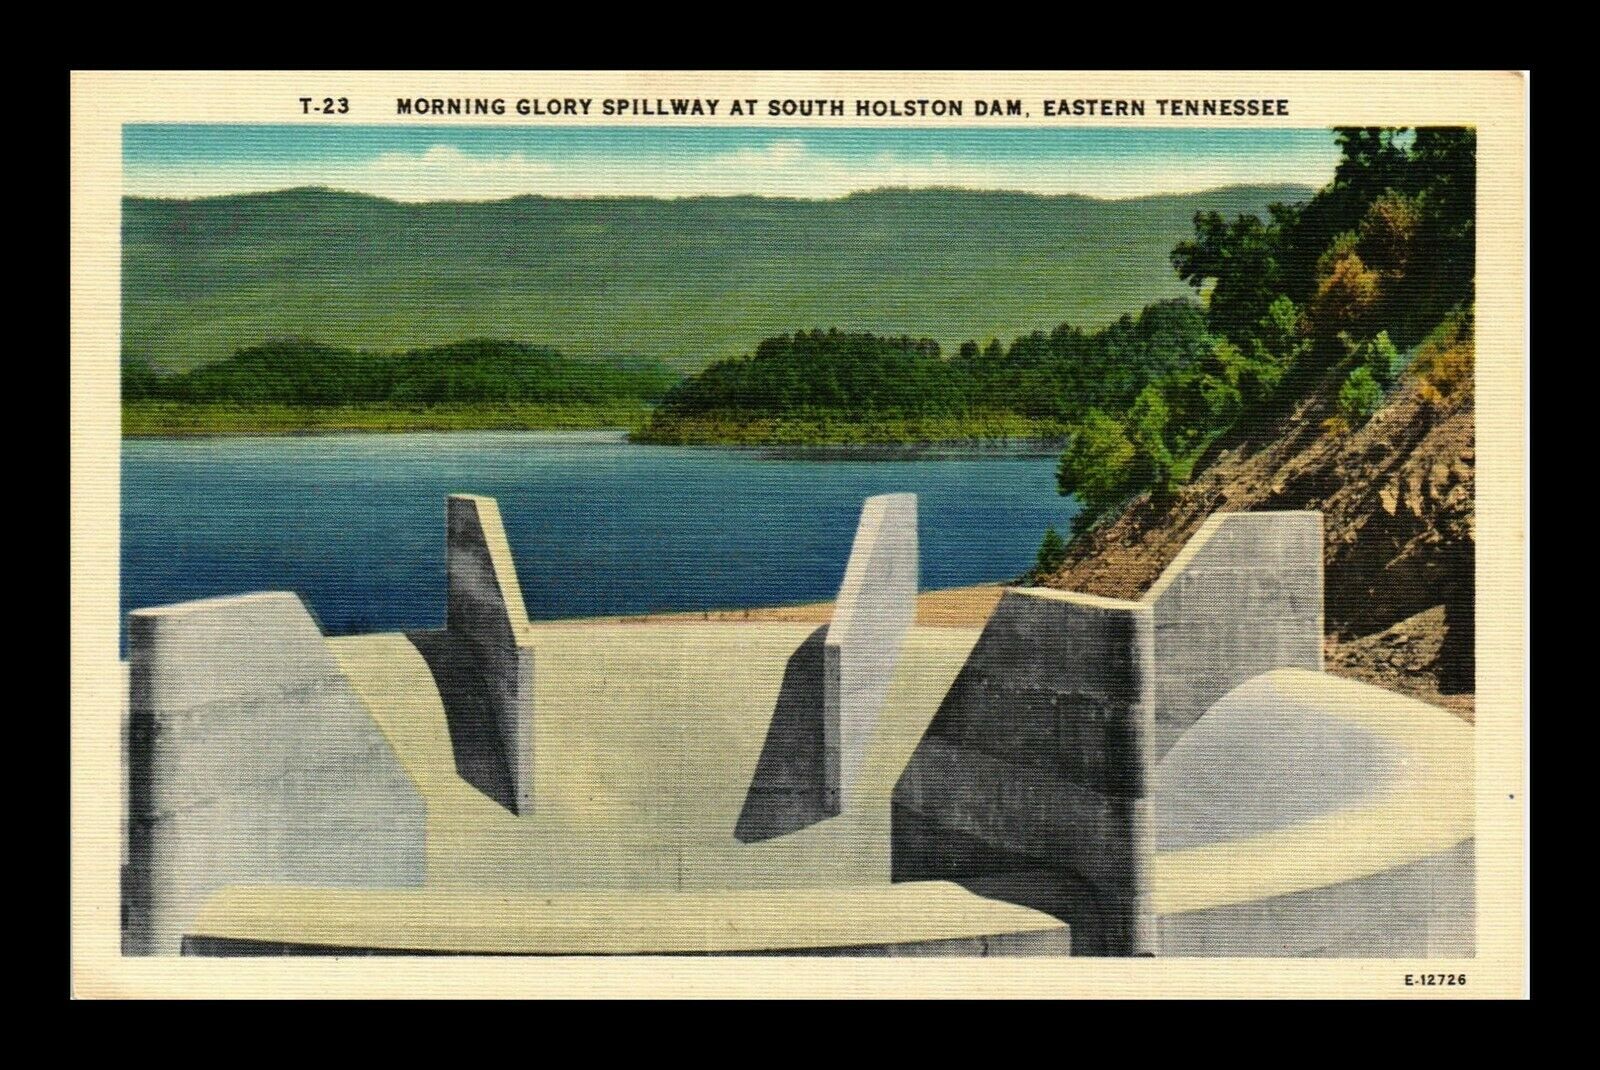 DR JIM STAMPS US MORNING GLORY SPILLWAY HOLSTON DAM TENNESSEE POSTCARD